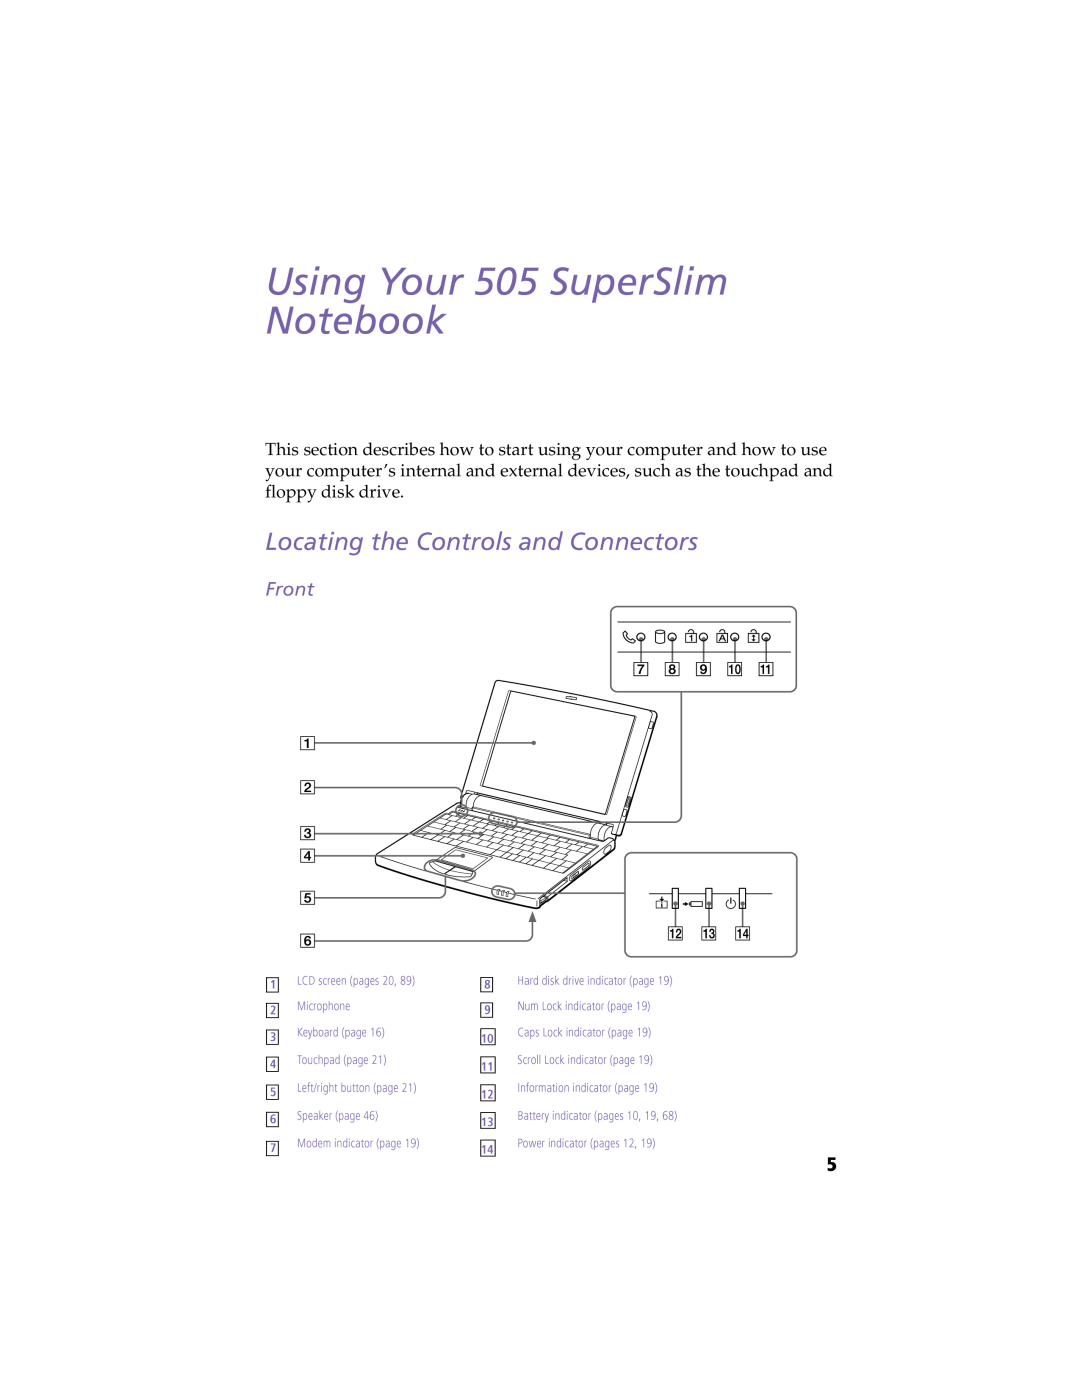 Sony PCG505FX manual Using Your 505 SuperSlim Notebook, Touchpad, Batty, 10,19,68, Speakerpage46, Left/rightbuttonpage21 